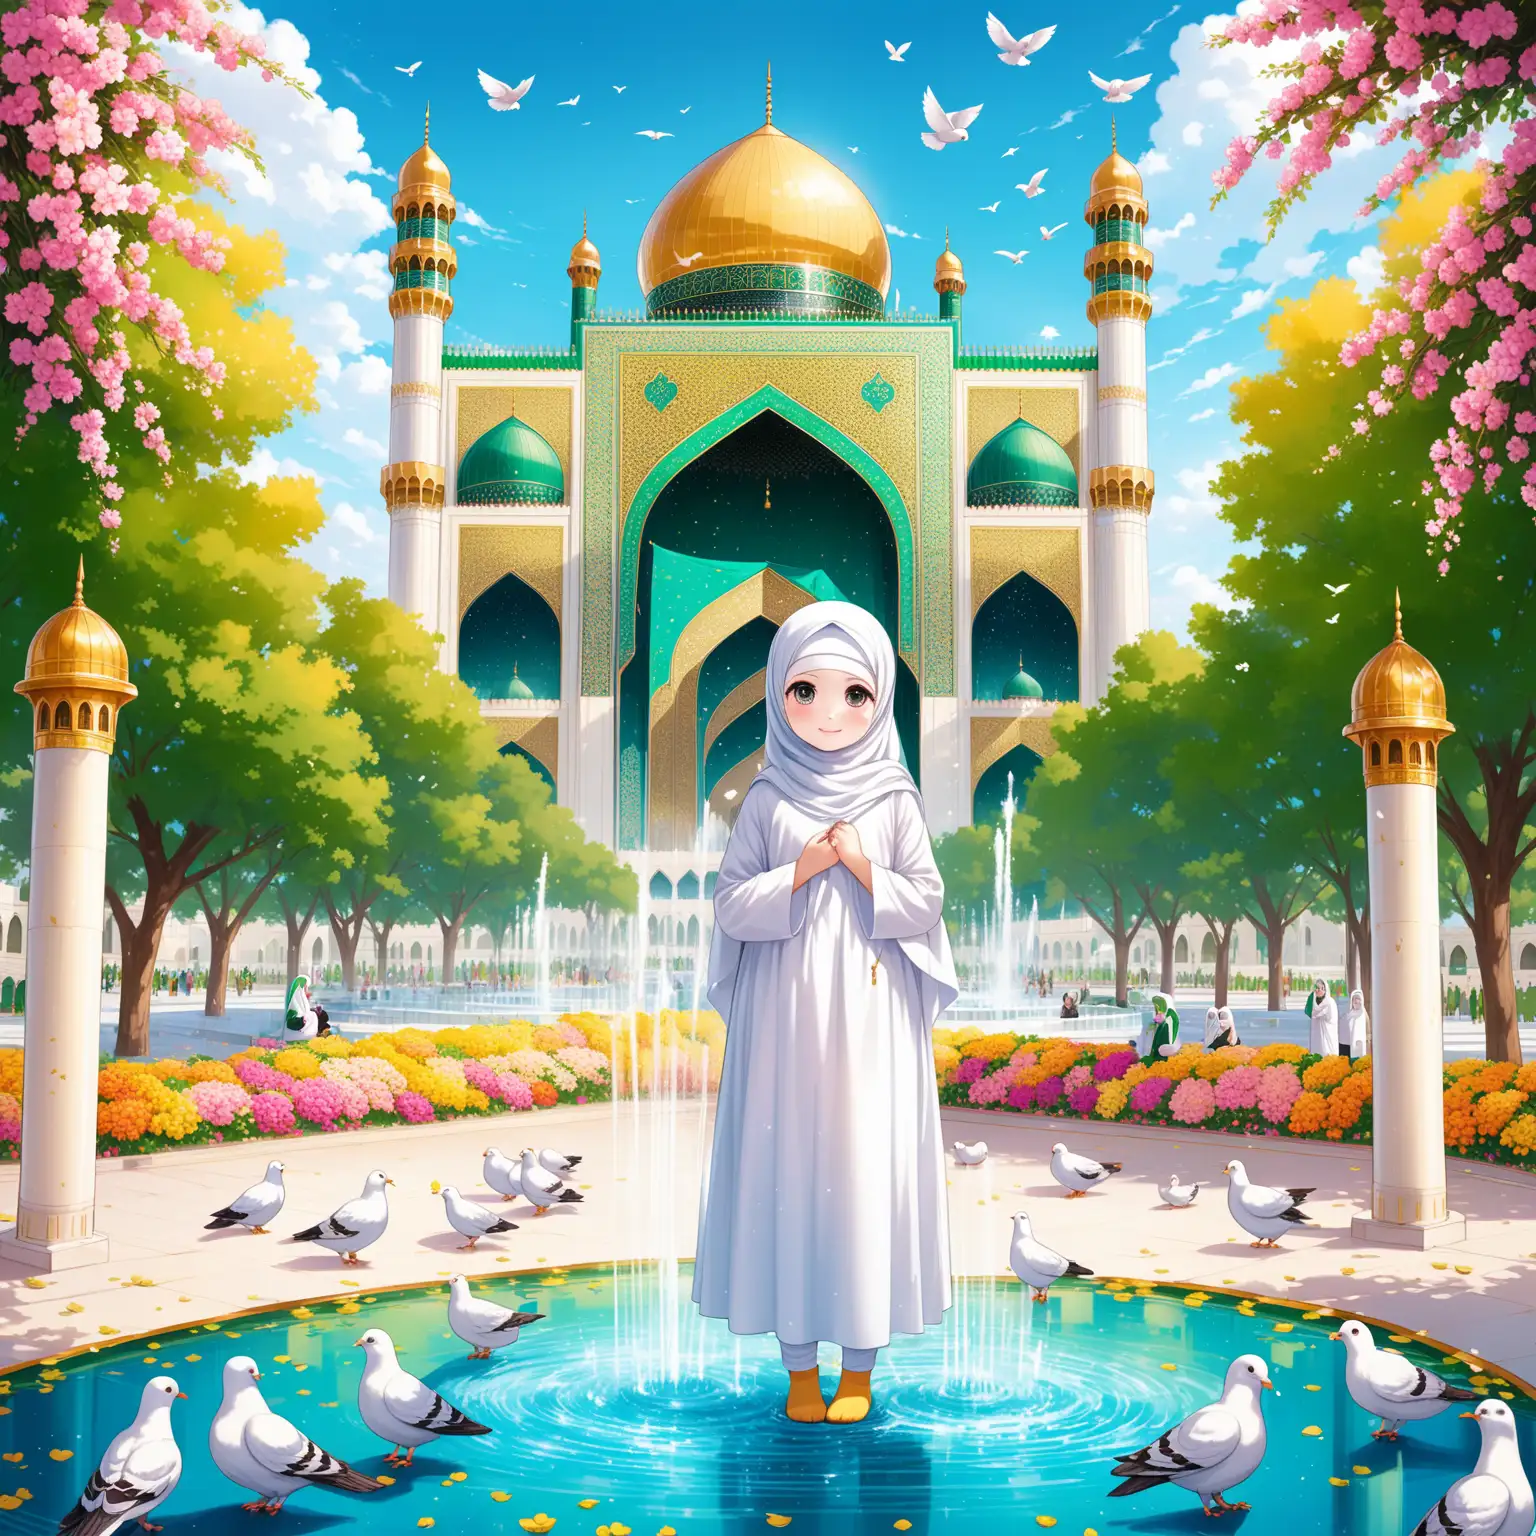 Character Persian little girl(full height, Big white flag in one hand proudly, baby face, Muslim, with emphasis no hair out of veil(Hijab), smaller eyes, bigger nose, white skin, cute, smiling, wearing socks, clothes full of Persian designs).

Atmosphere beautiful shrine of Imam Reza, golden dome, yard, Colorful flowers, pond with water fountain, many pigeons, nobody.